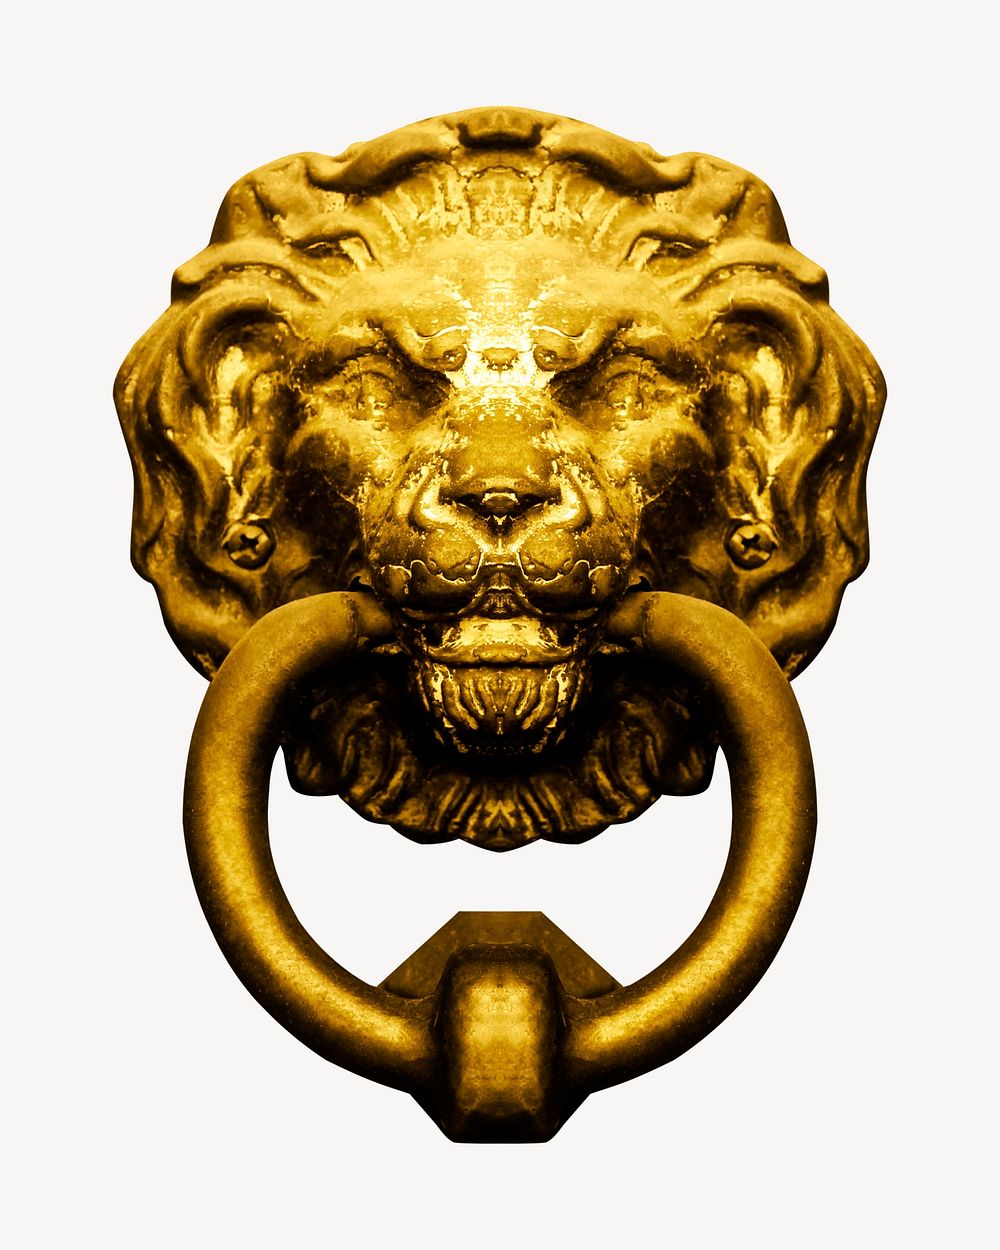 Door knocker collage element, isolated image psd